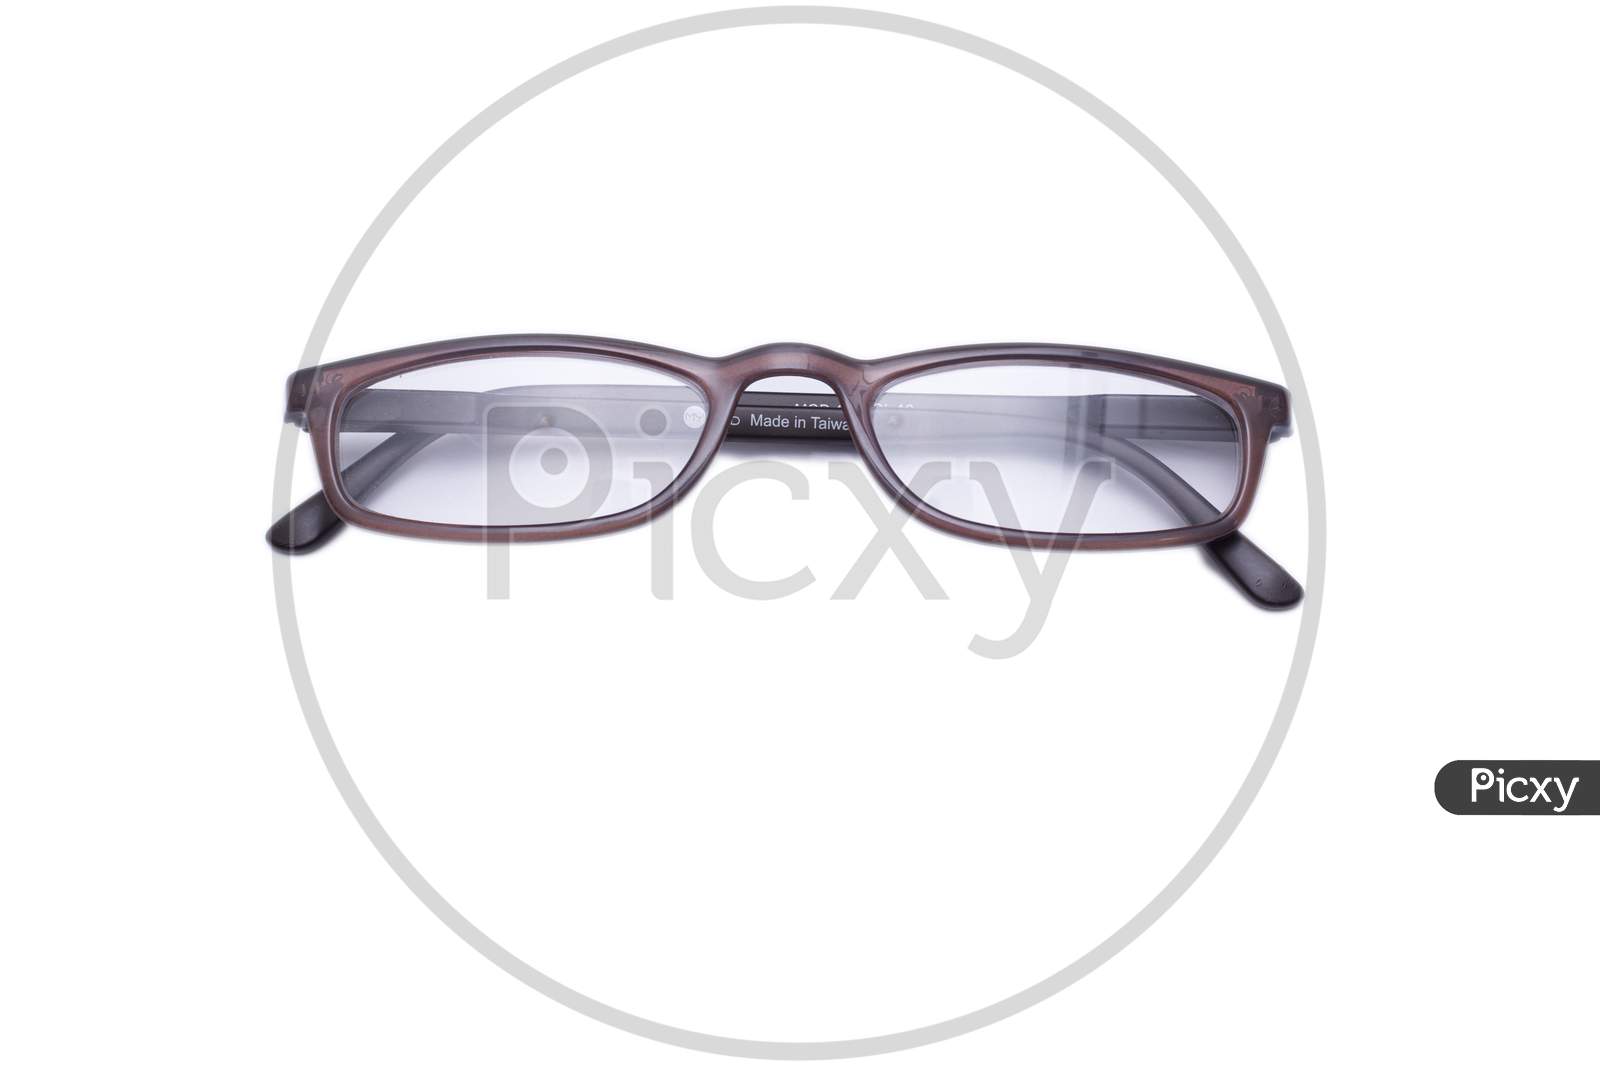 Top View Photo Of Reading Specs,Brown And Black Colour Gradient Frame.